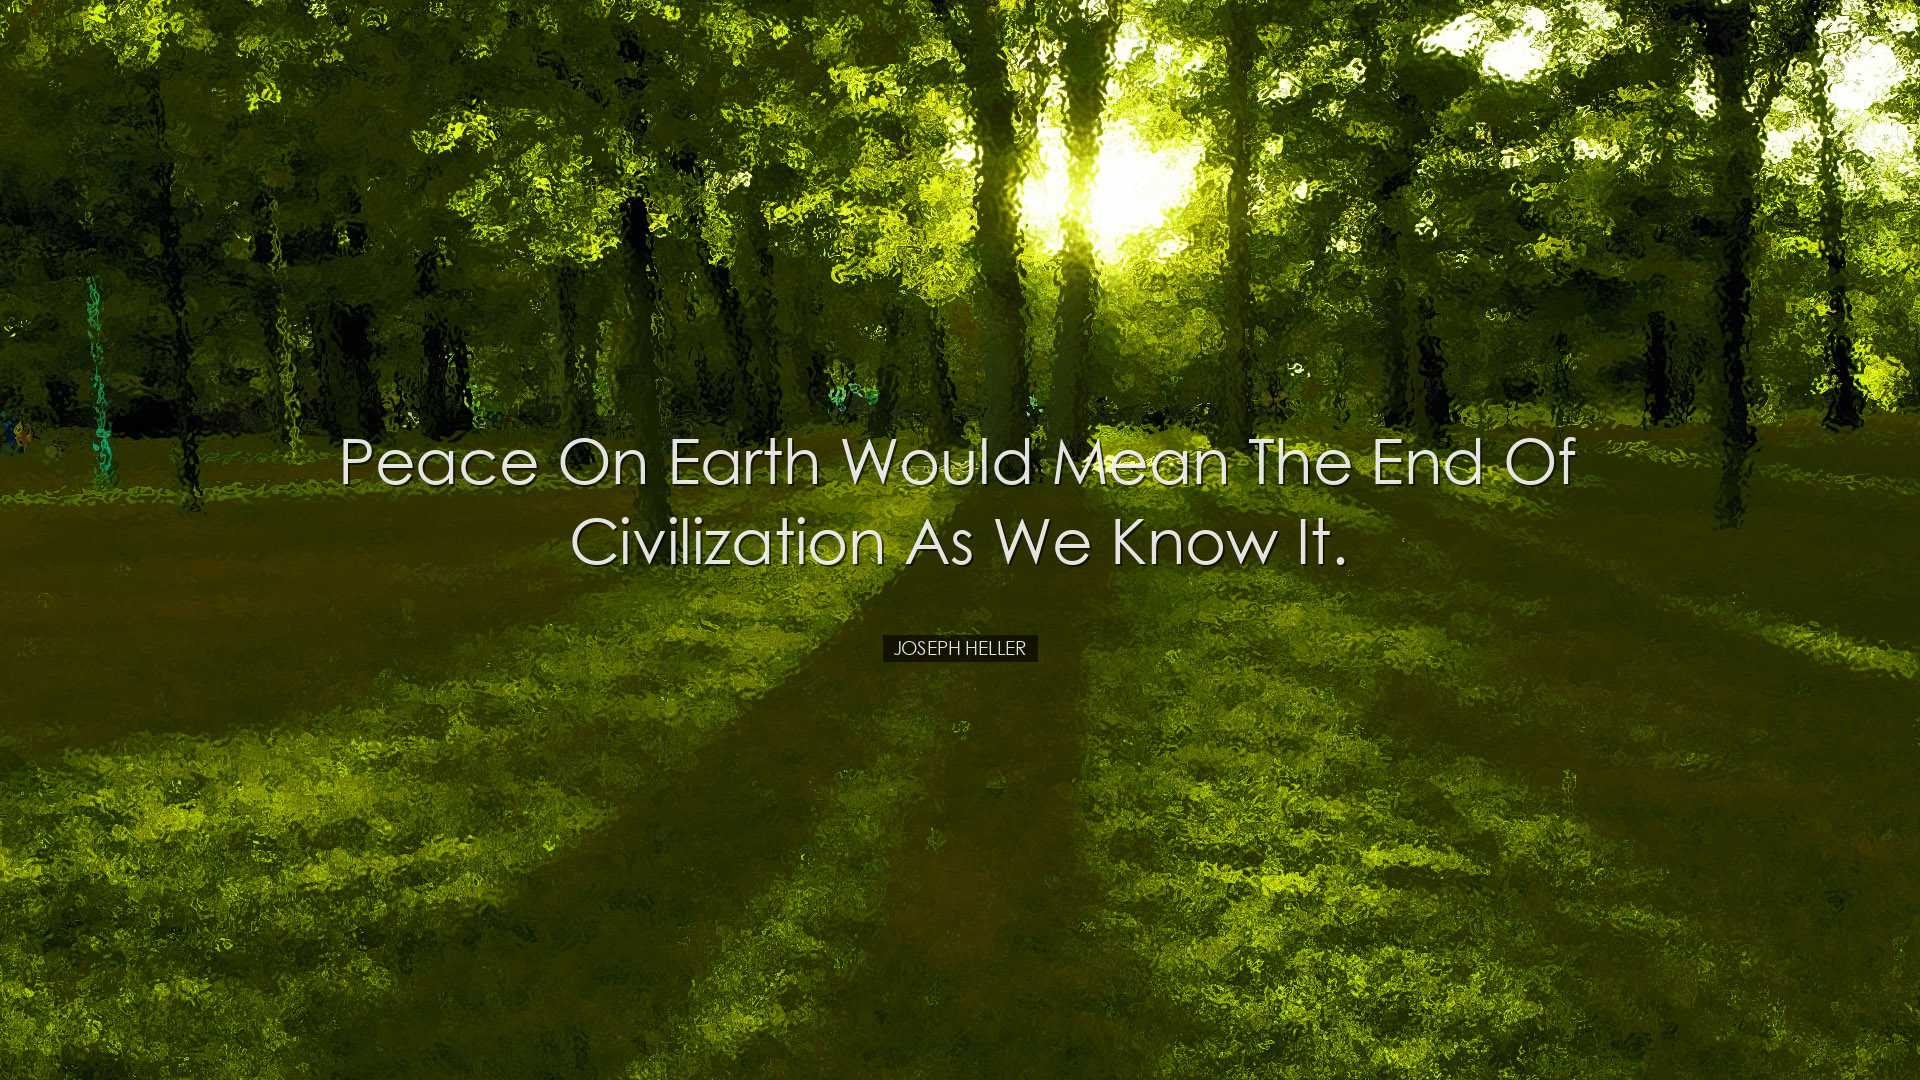 Peace on earth would mean the end of civilization as we know it. -